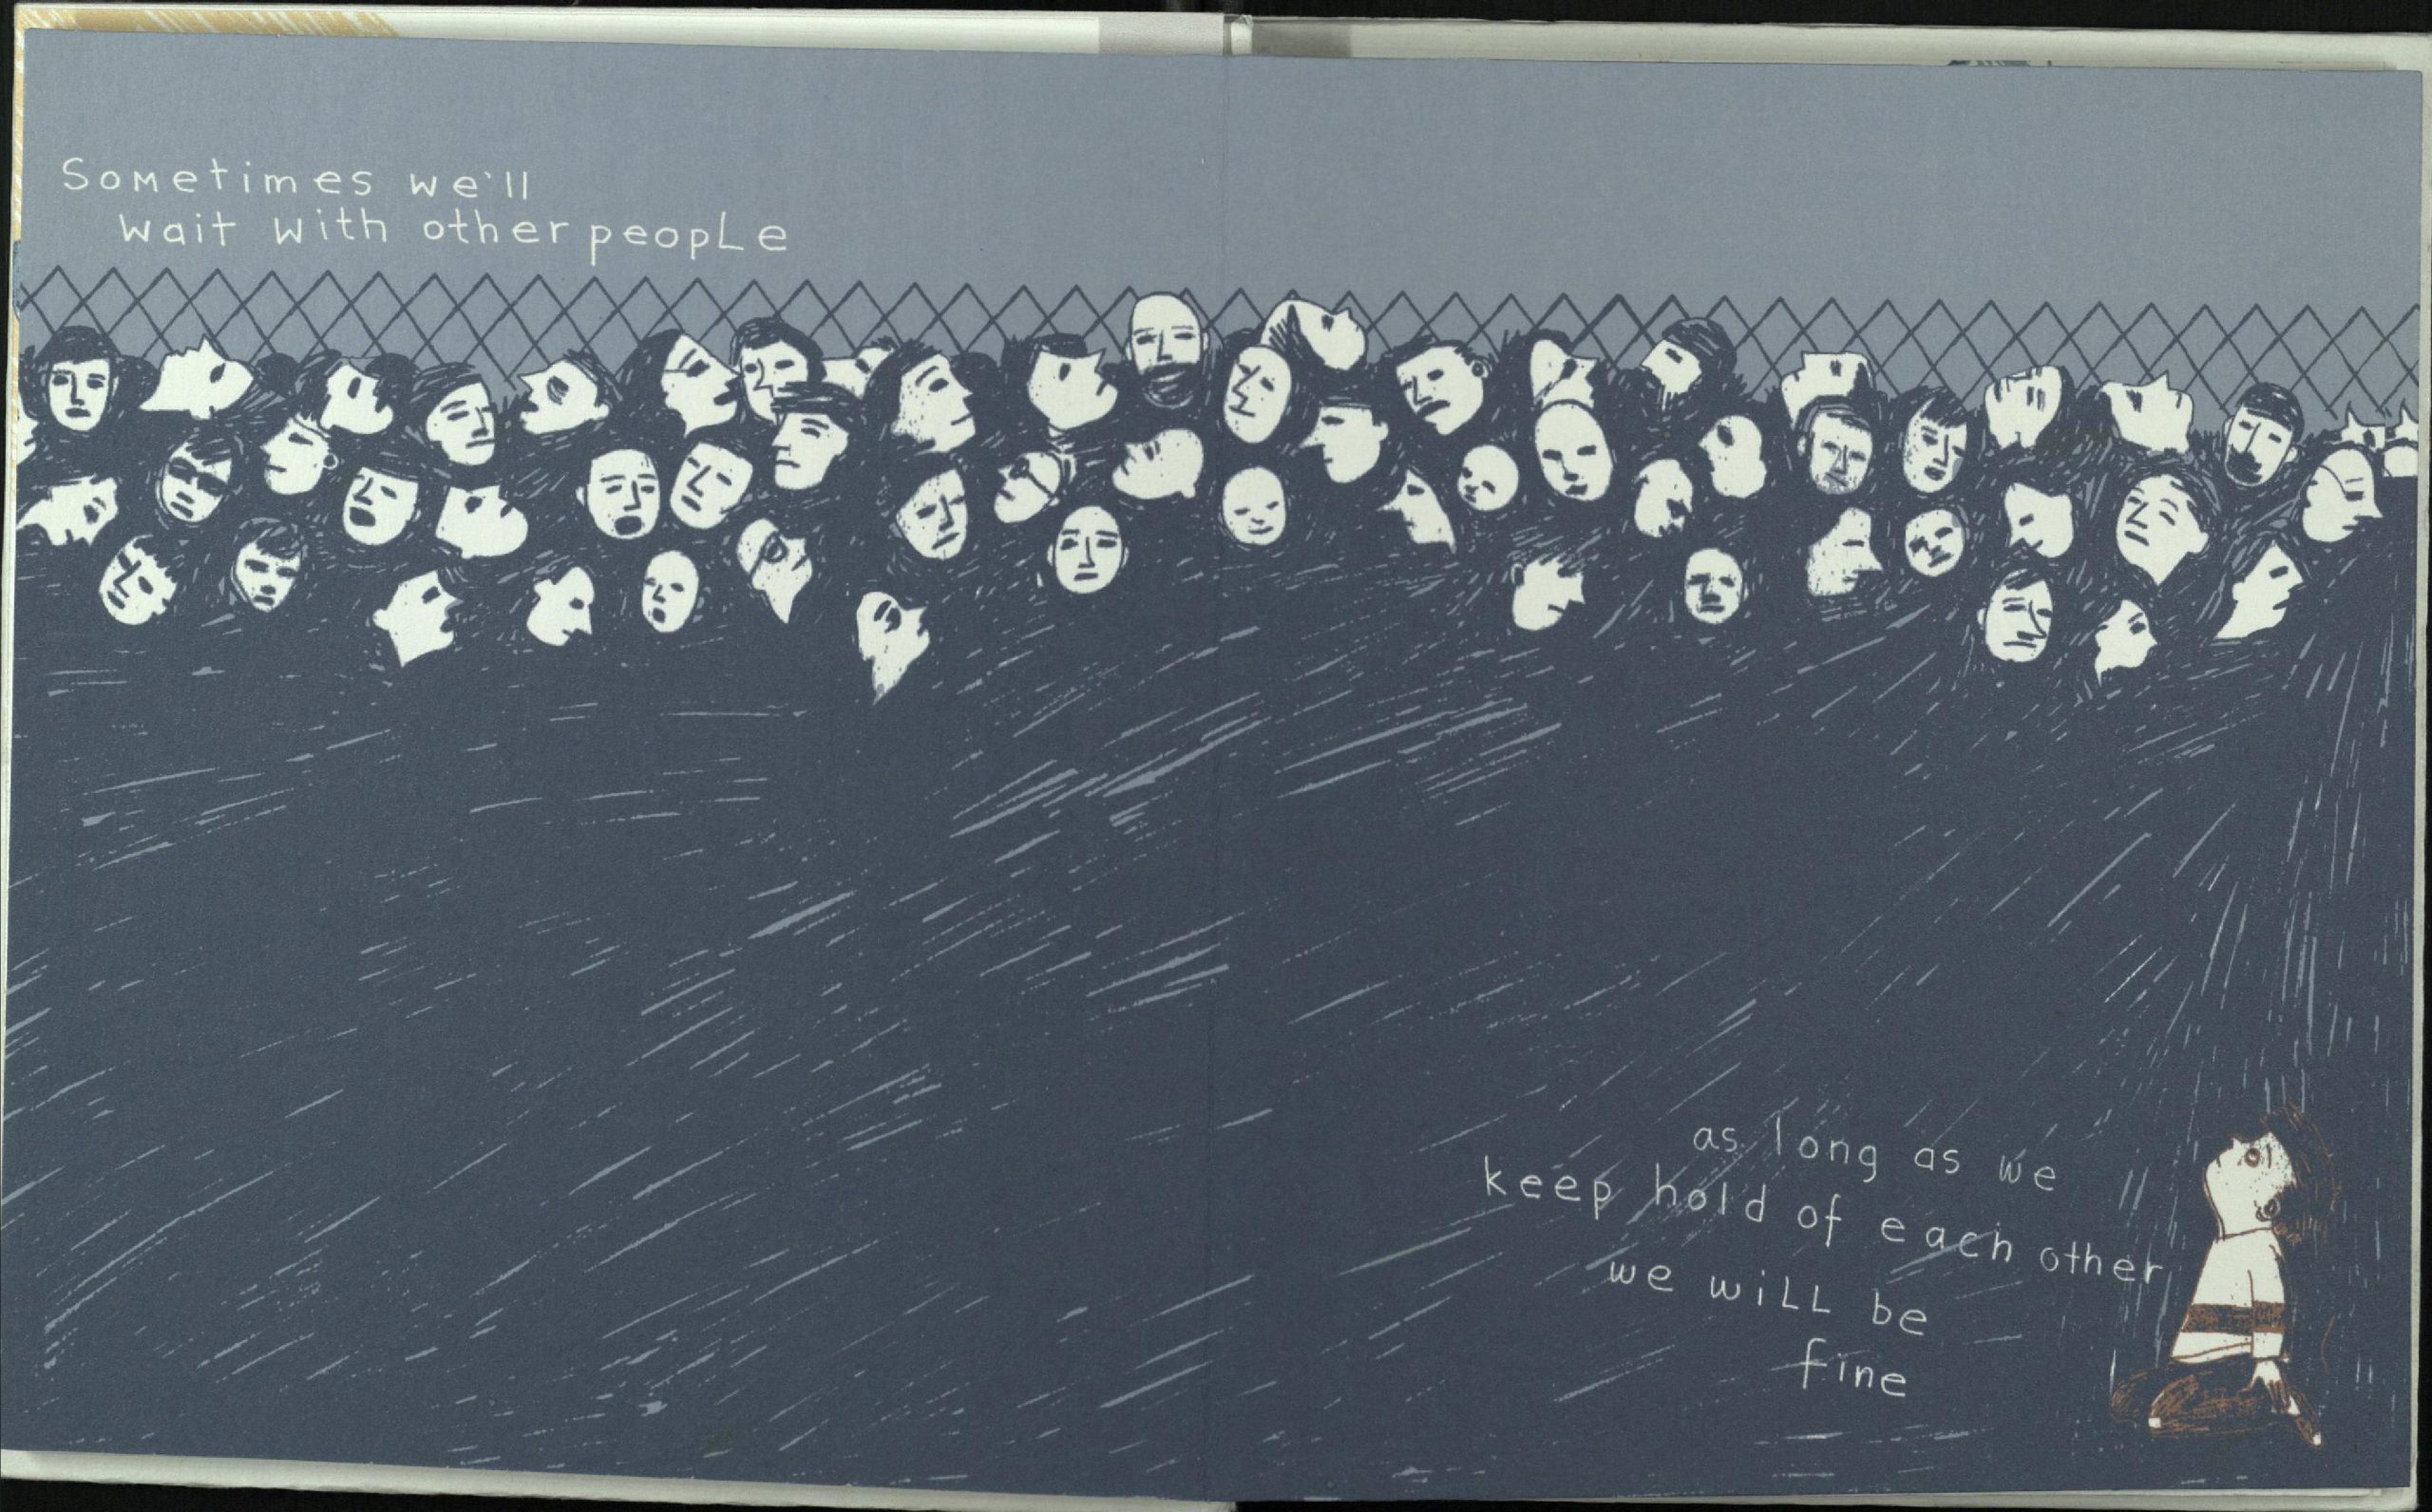 Spread from My Name is Not Refugee dummy book showing crowd of people in black and white 